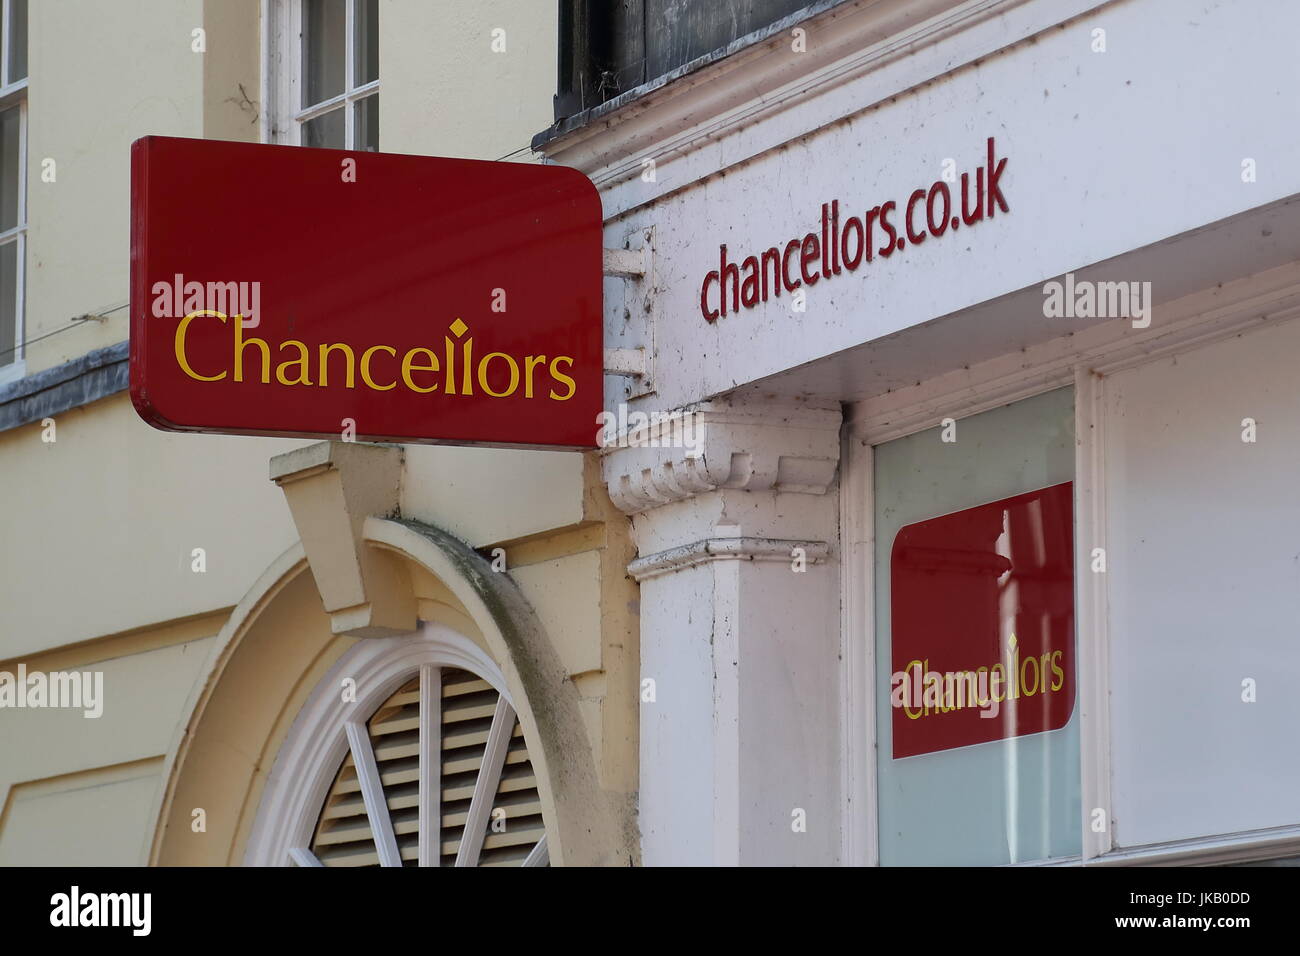 Chancellors Real Estate company office in Reading, UK Stock Photo